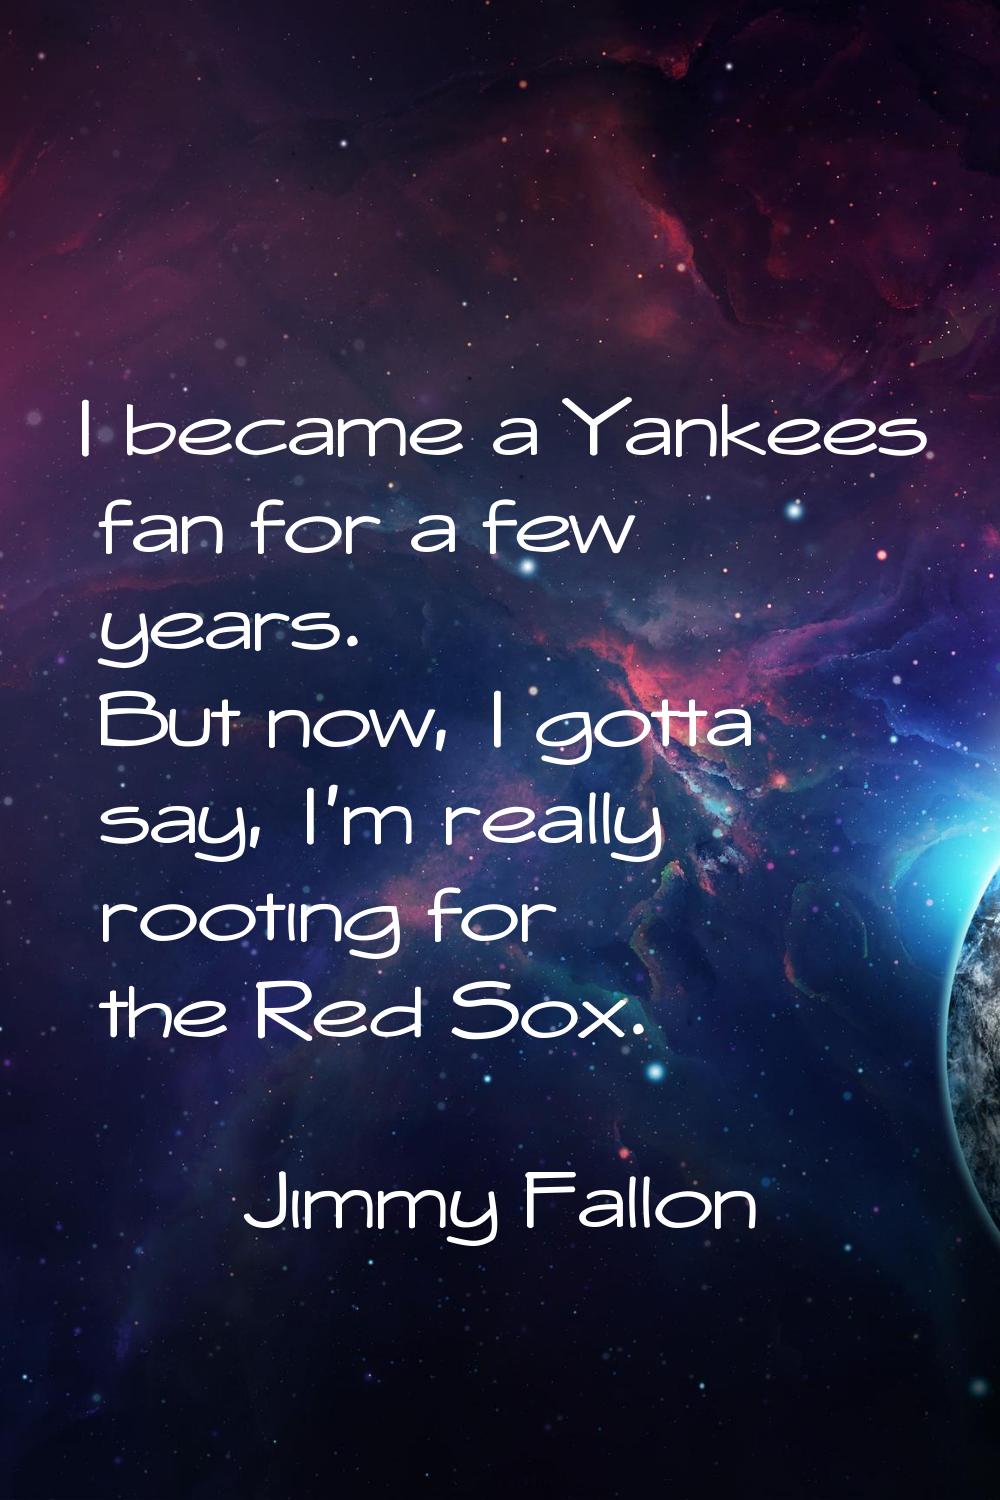 I became a Yankees fan for a few years. But now, I gotta say, I'm really rooting for the Red Sox.